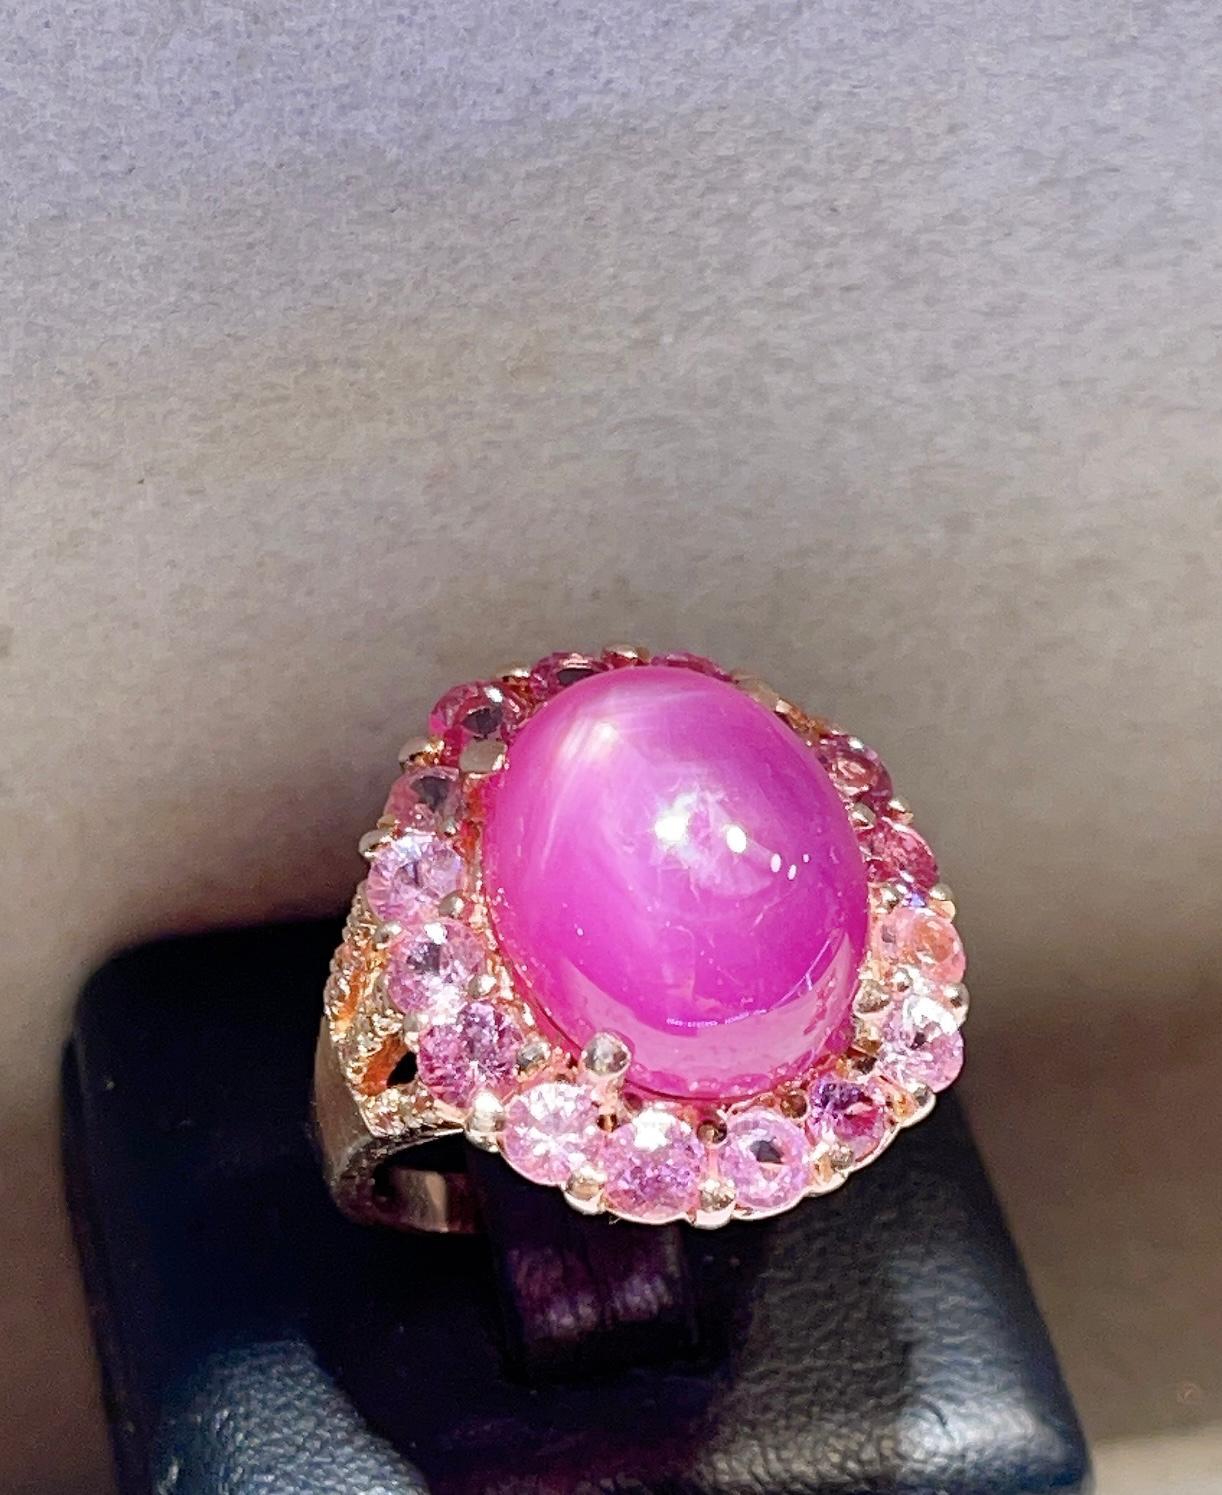 Cabochon Bochic “Capri” Star Ruby Ring with Pink Sapphires set in 22K Gold & Silver